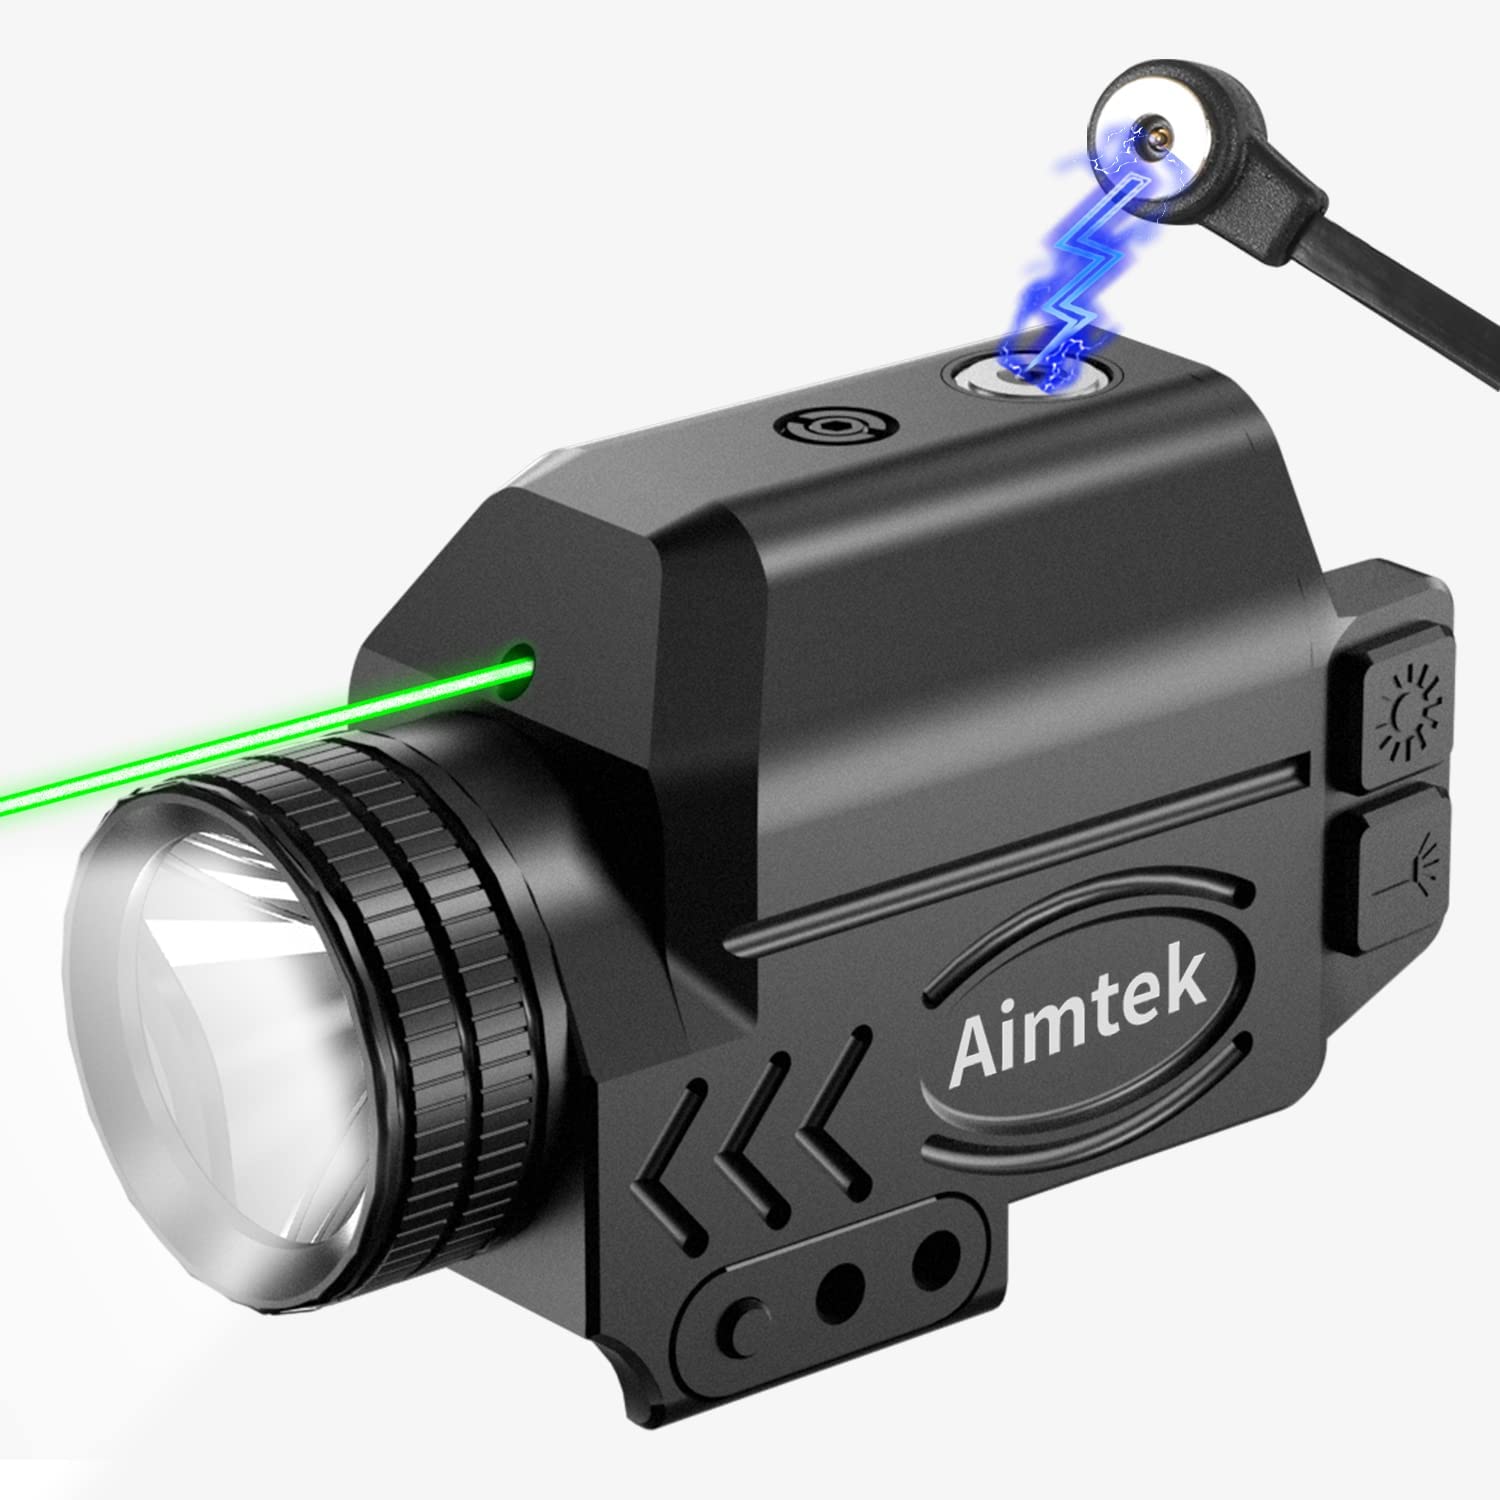 1000 Lumens Aimtek Pistol Green Laser Sight and Tactical Flashlight Combo ,Strobe Weapon Light and Laser with 3 Adjustment Holes,Magnetic Charging,For Compact Pistol with Picatinny Rail and Screw Slot